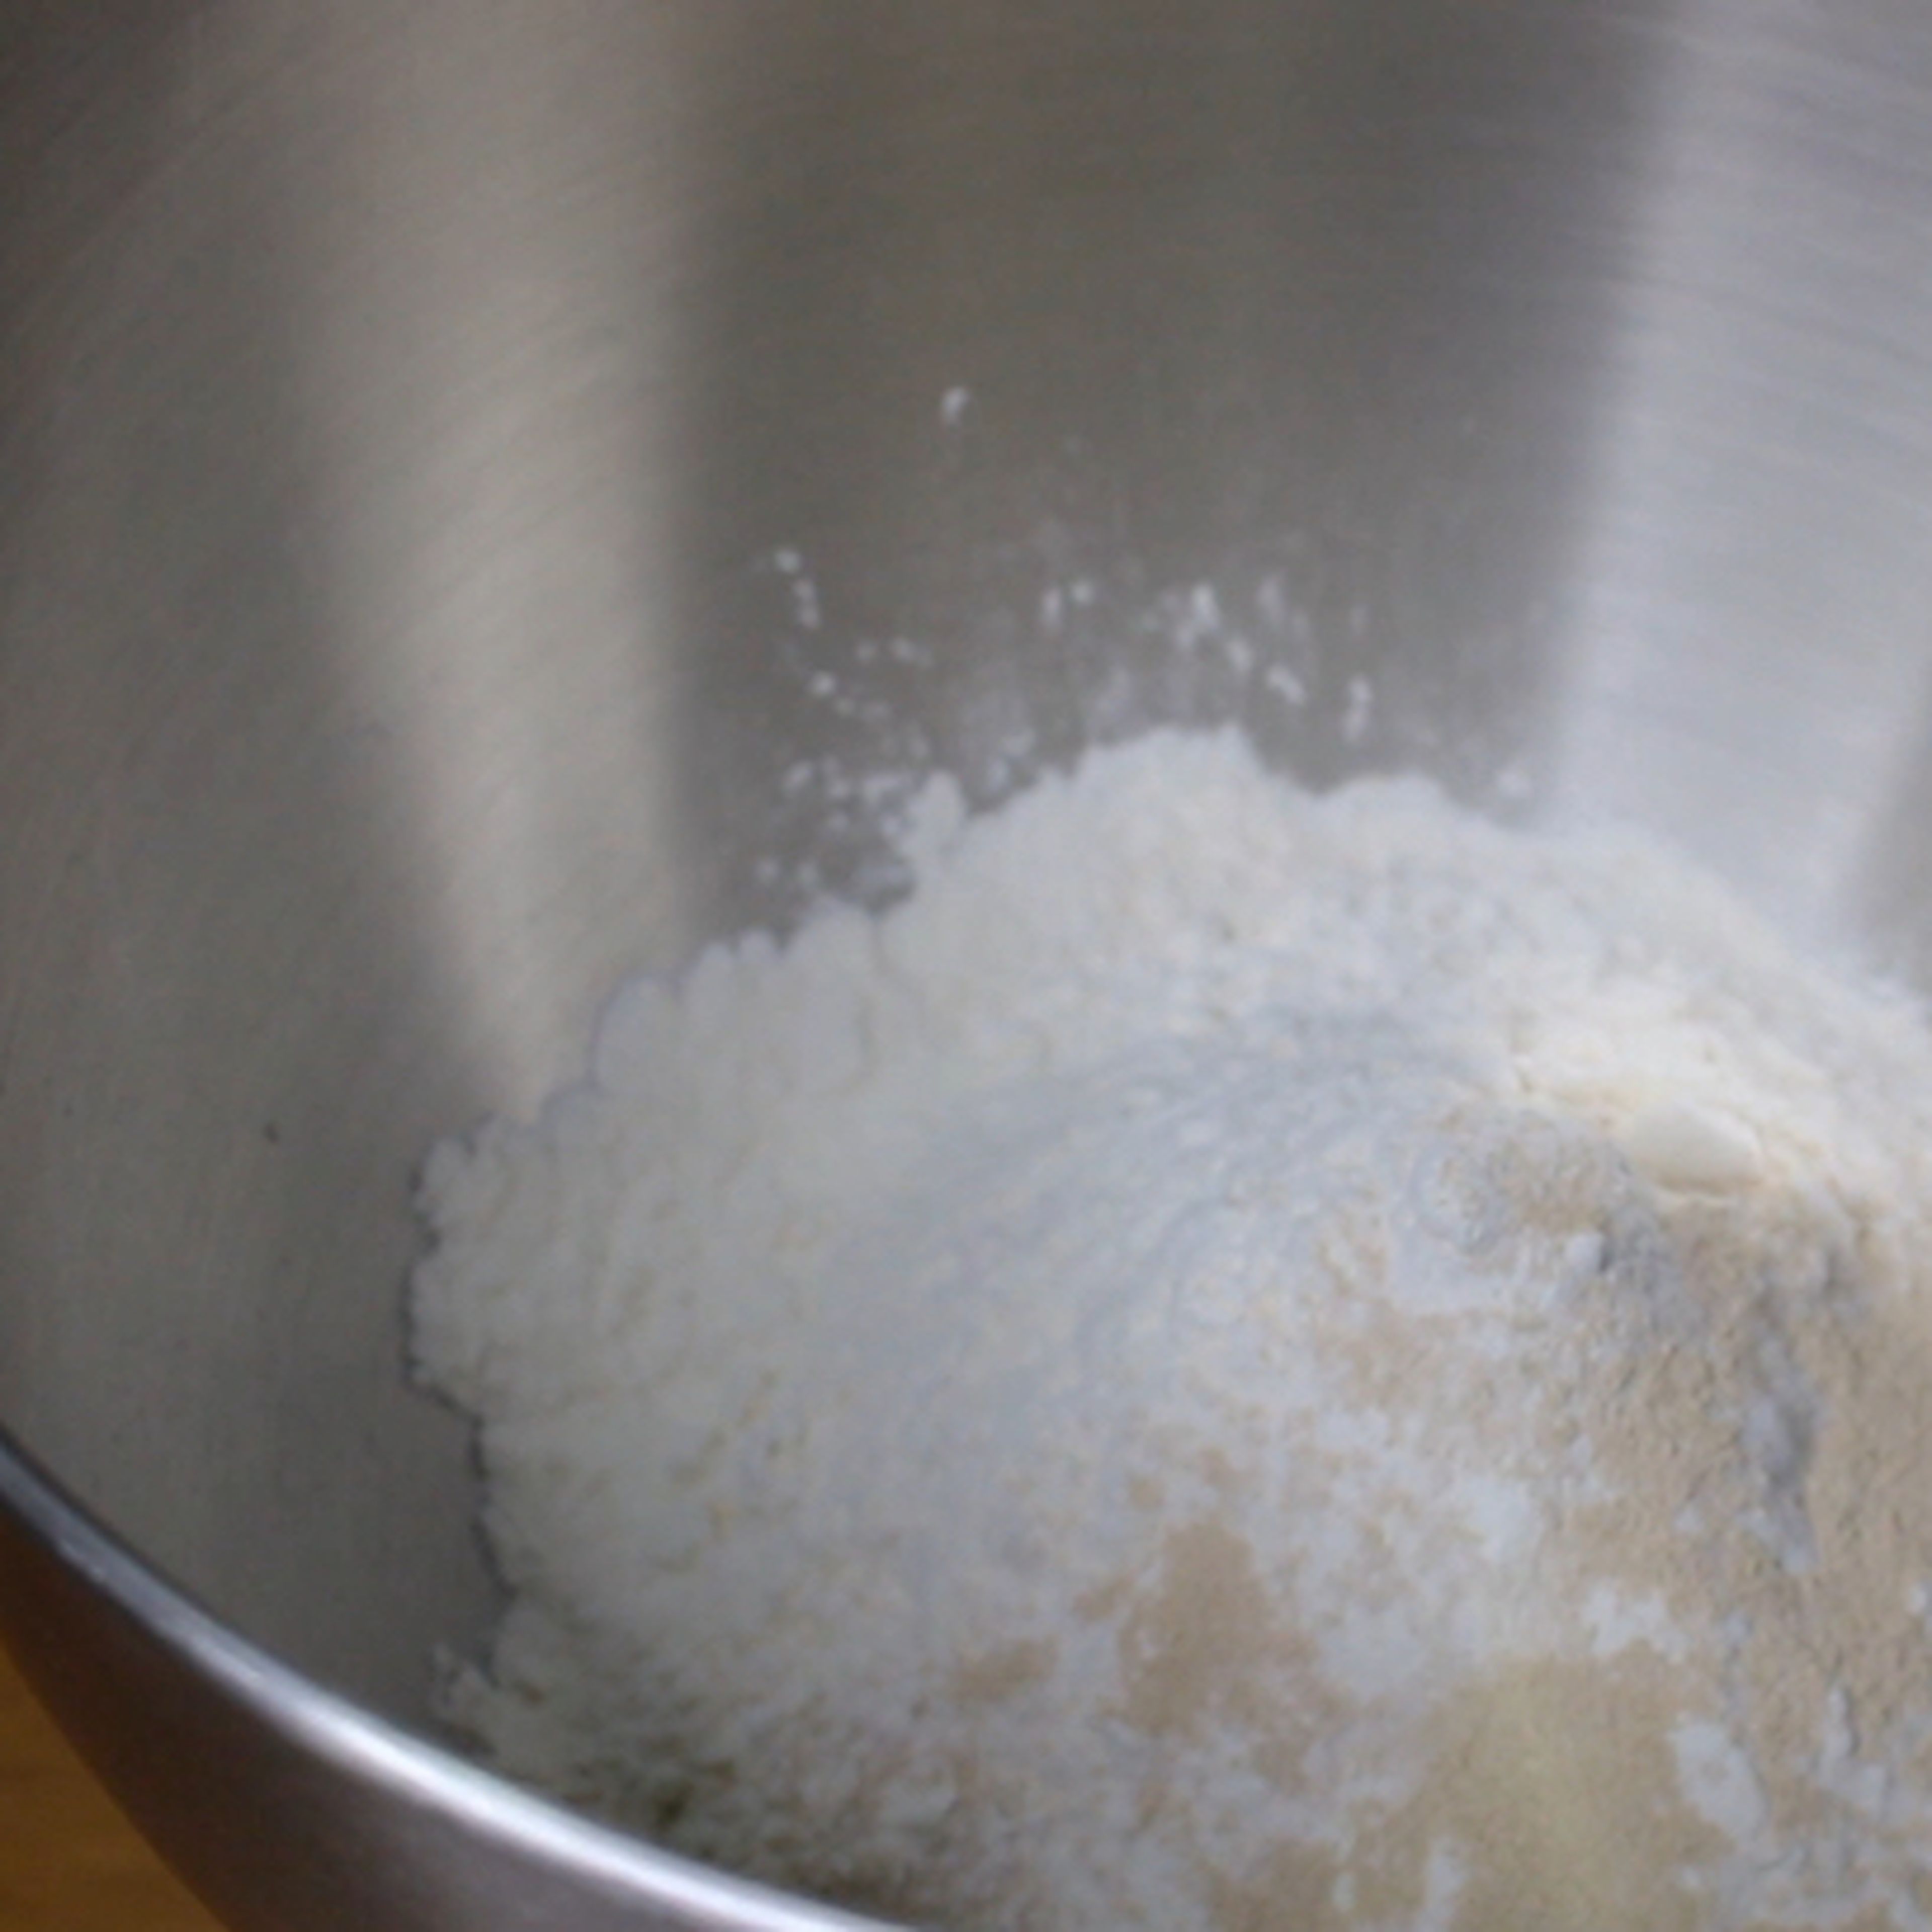 Combined the dry ingredients. (bread flour and active dry yeast) Whisk together until combined.